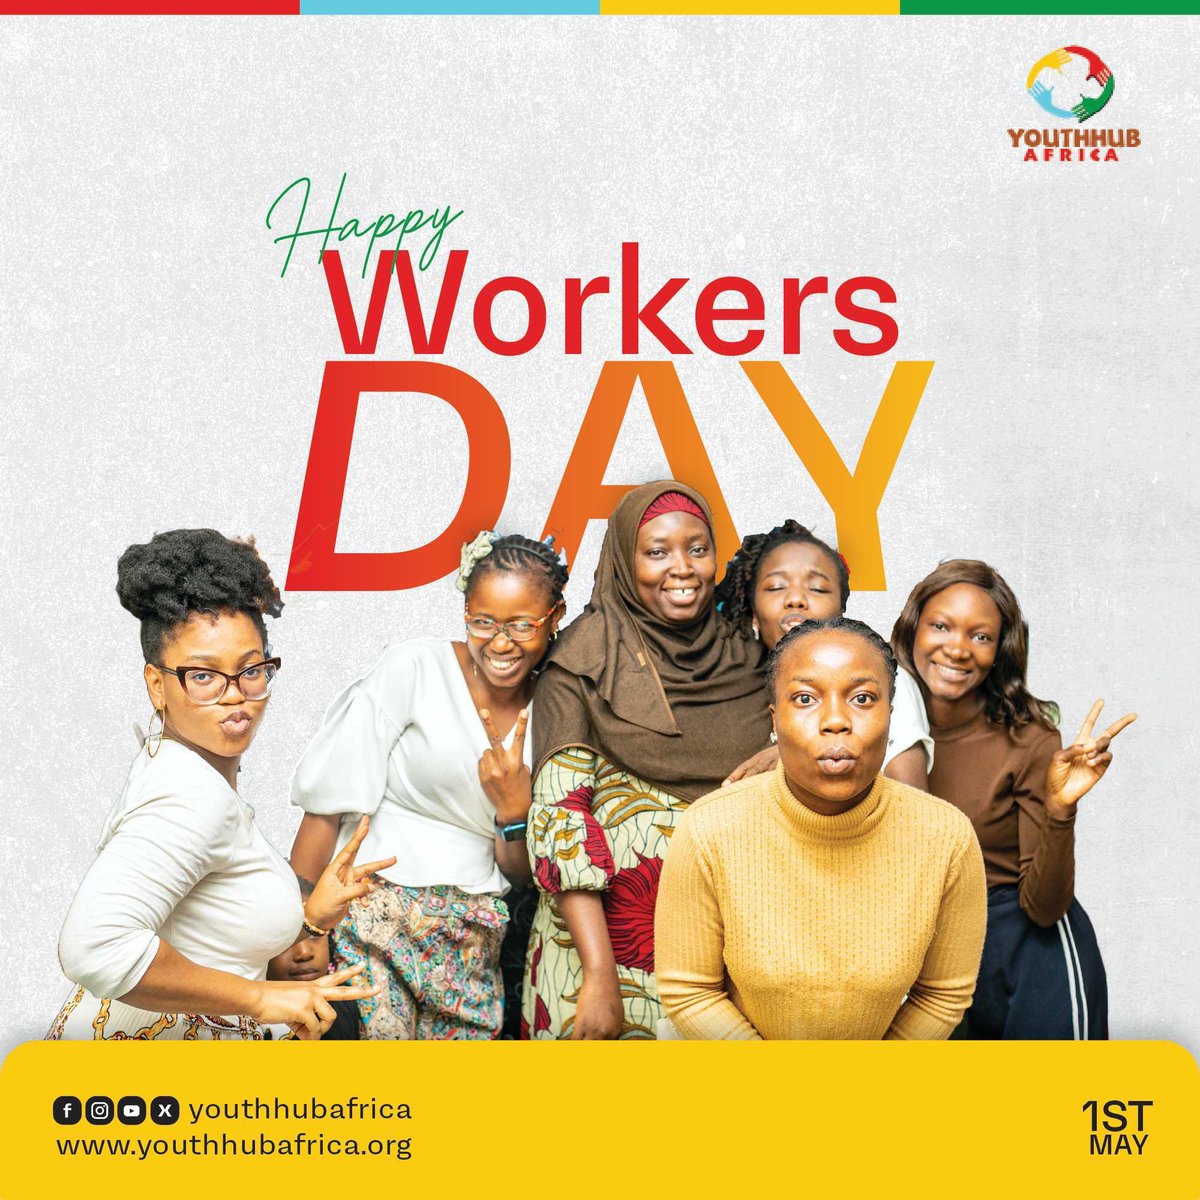 HAPPY WORKERS DAY! Today, we celebrate the hard work and dedication of workers around the world. Cheers to all workers on this special day! #WorkersDay || Salary || Chioma || Jada || Protest